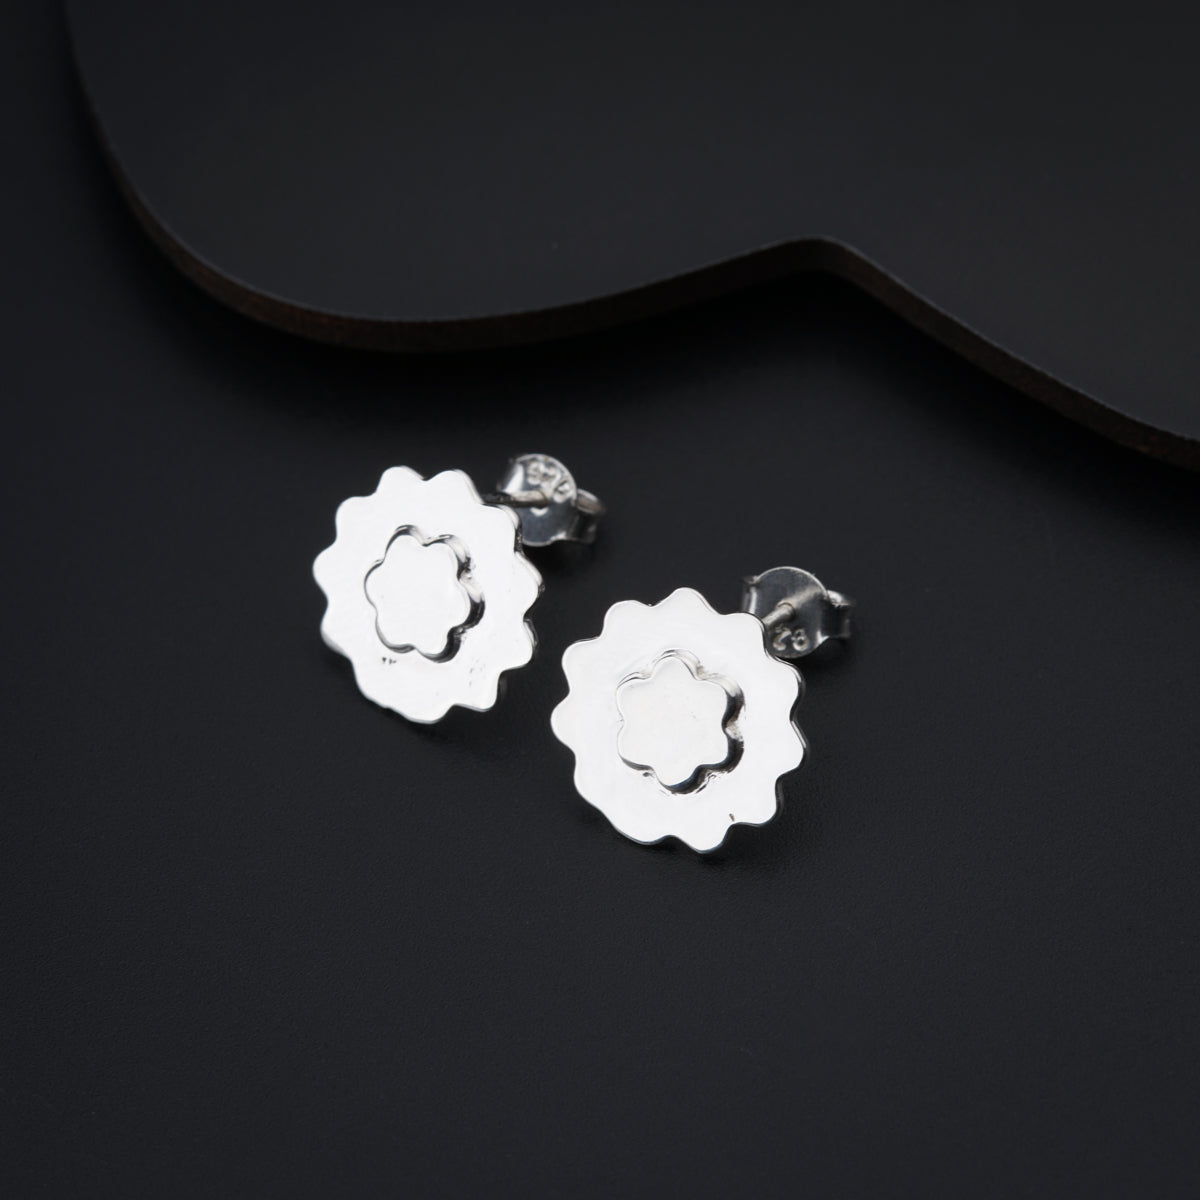 a pair of silver flower earrings on a black background